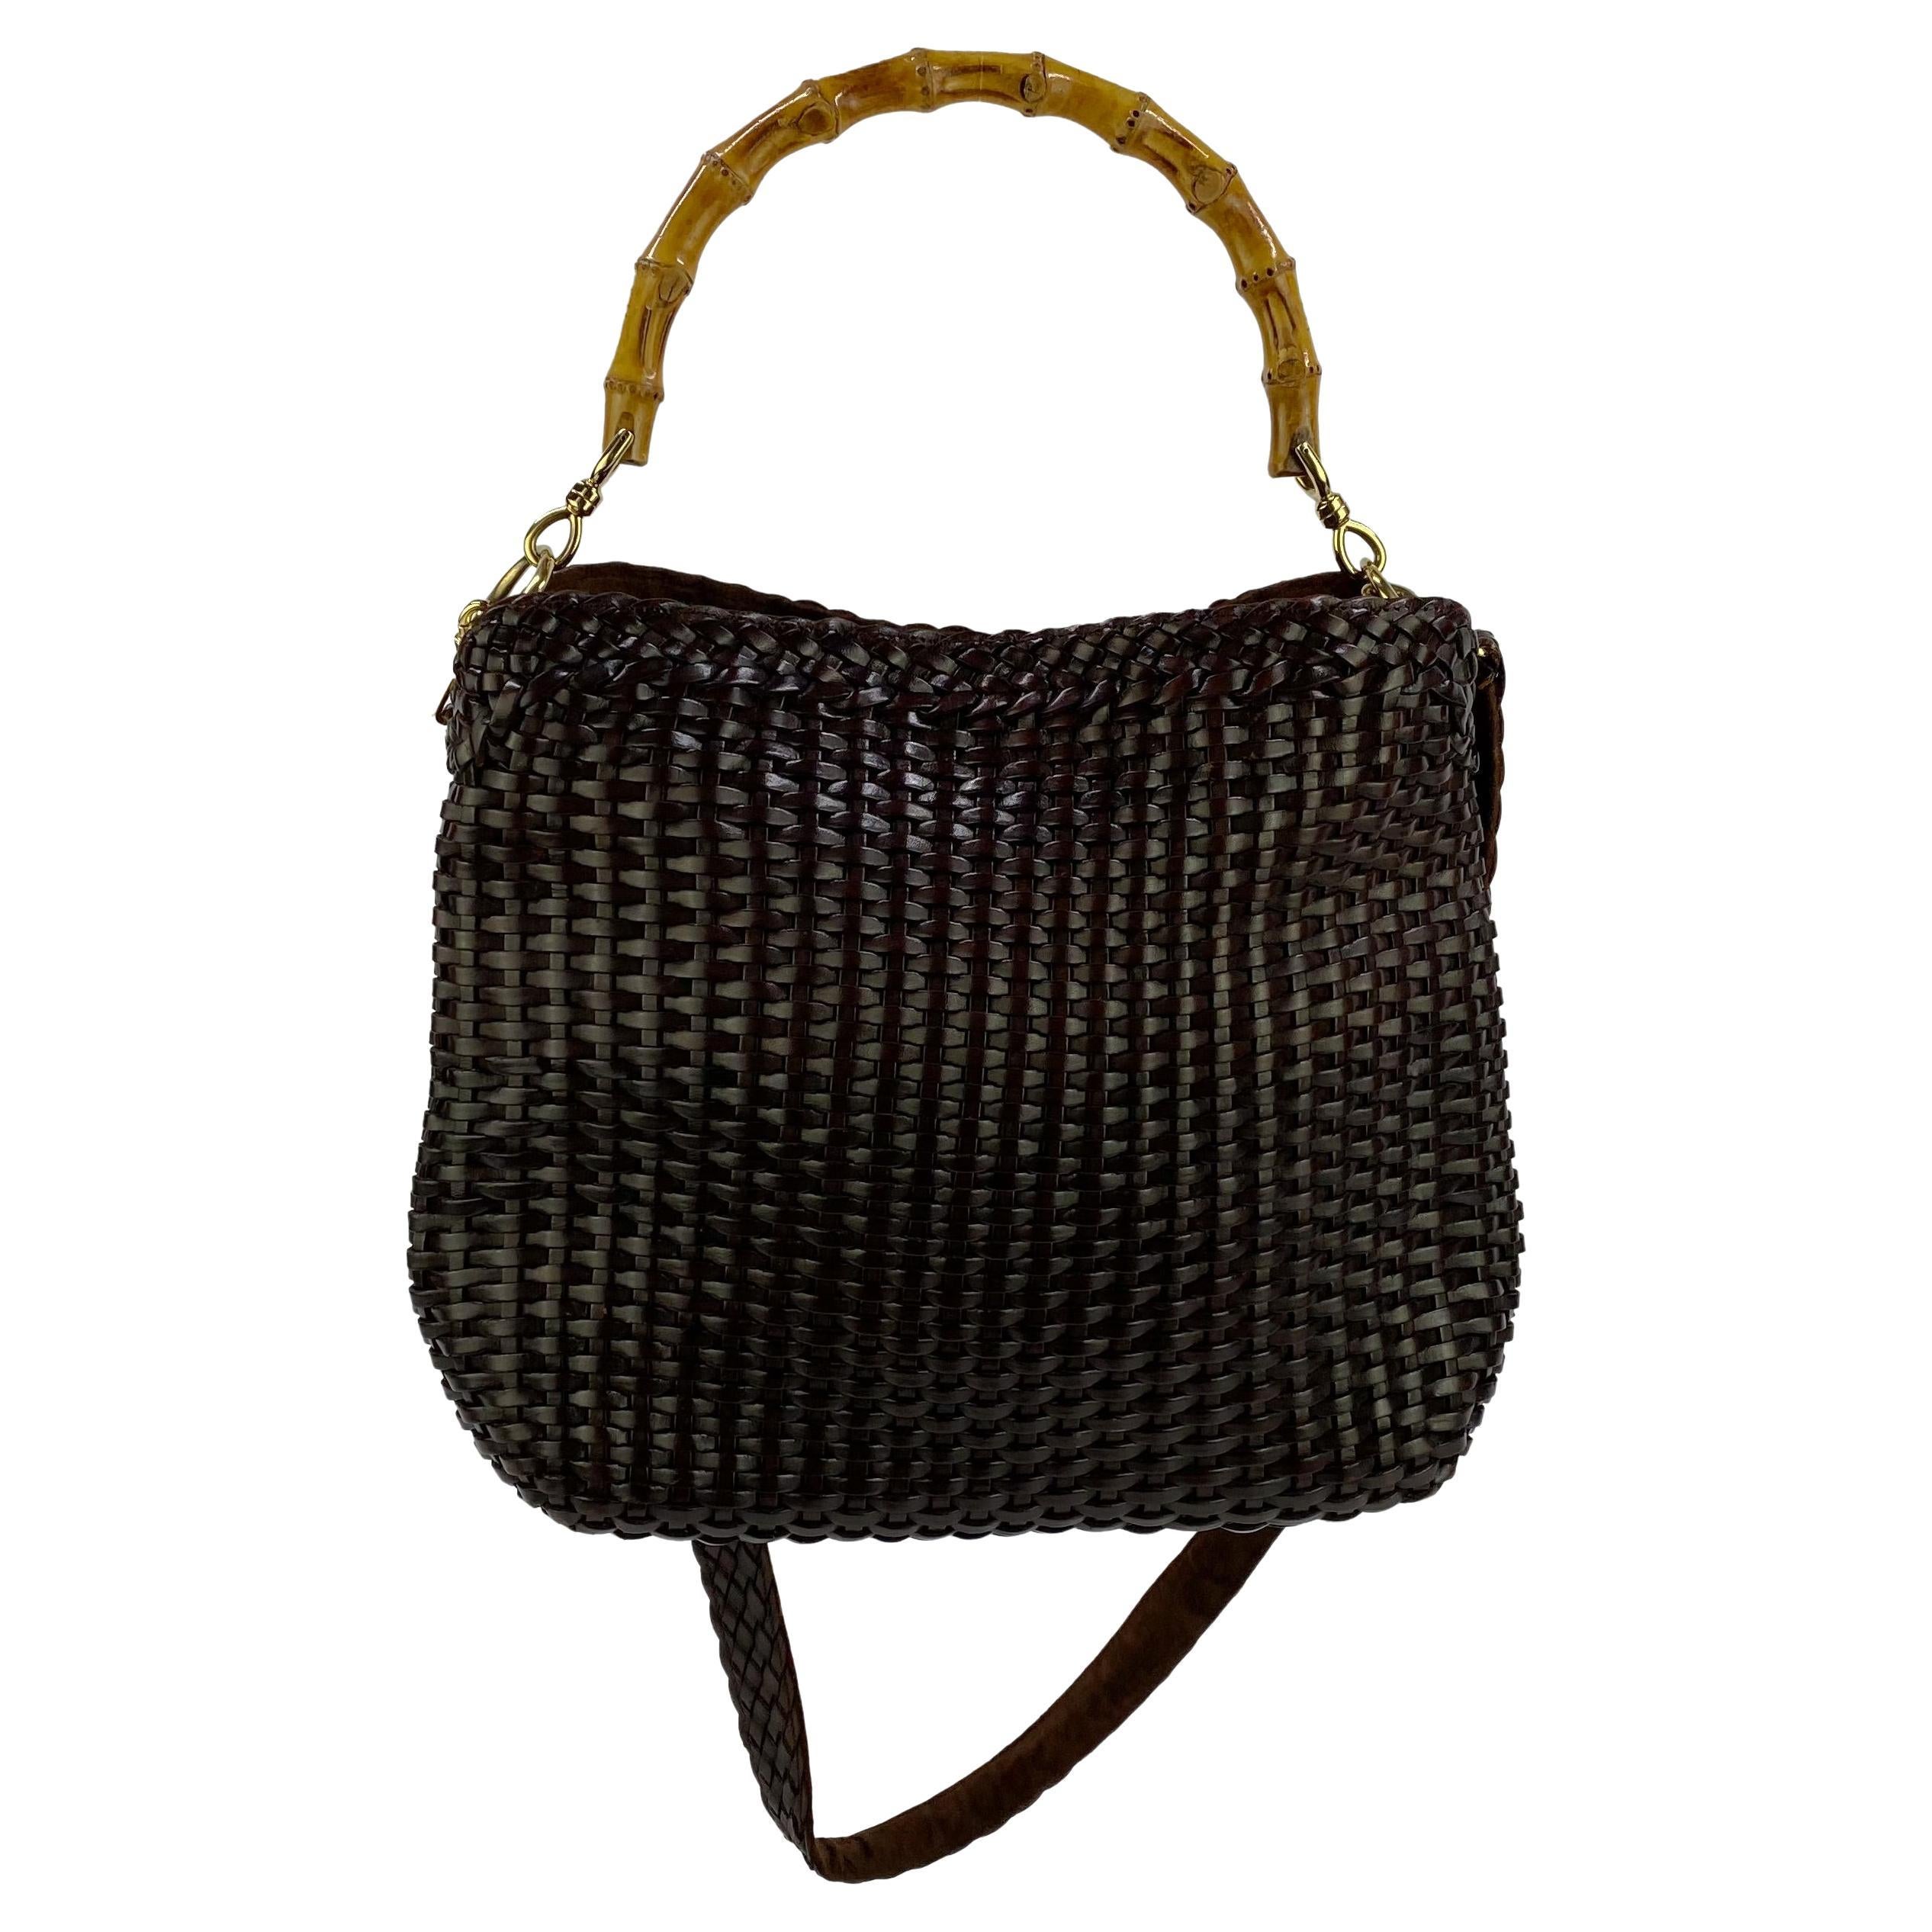 S/S 1997 Gucci by Tom Ford Woven Brown Leather Hobo Bamboo Bag with Strap 